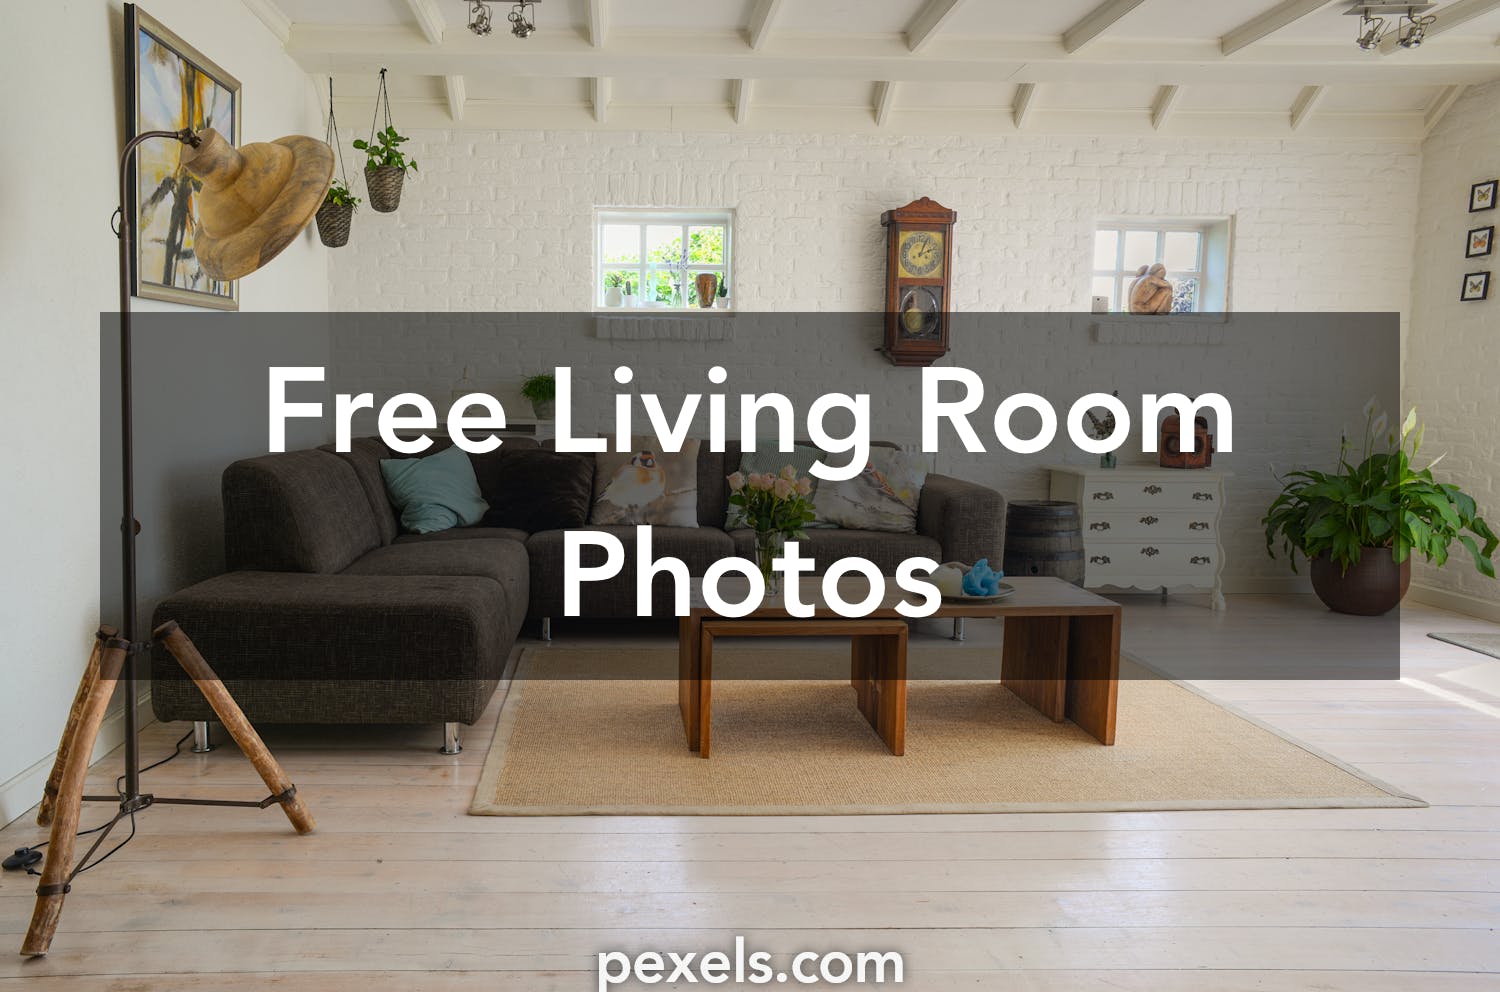 Copyright Free Images Of Living Room